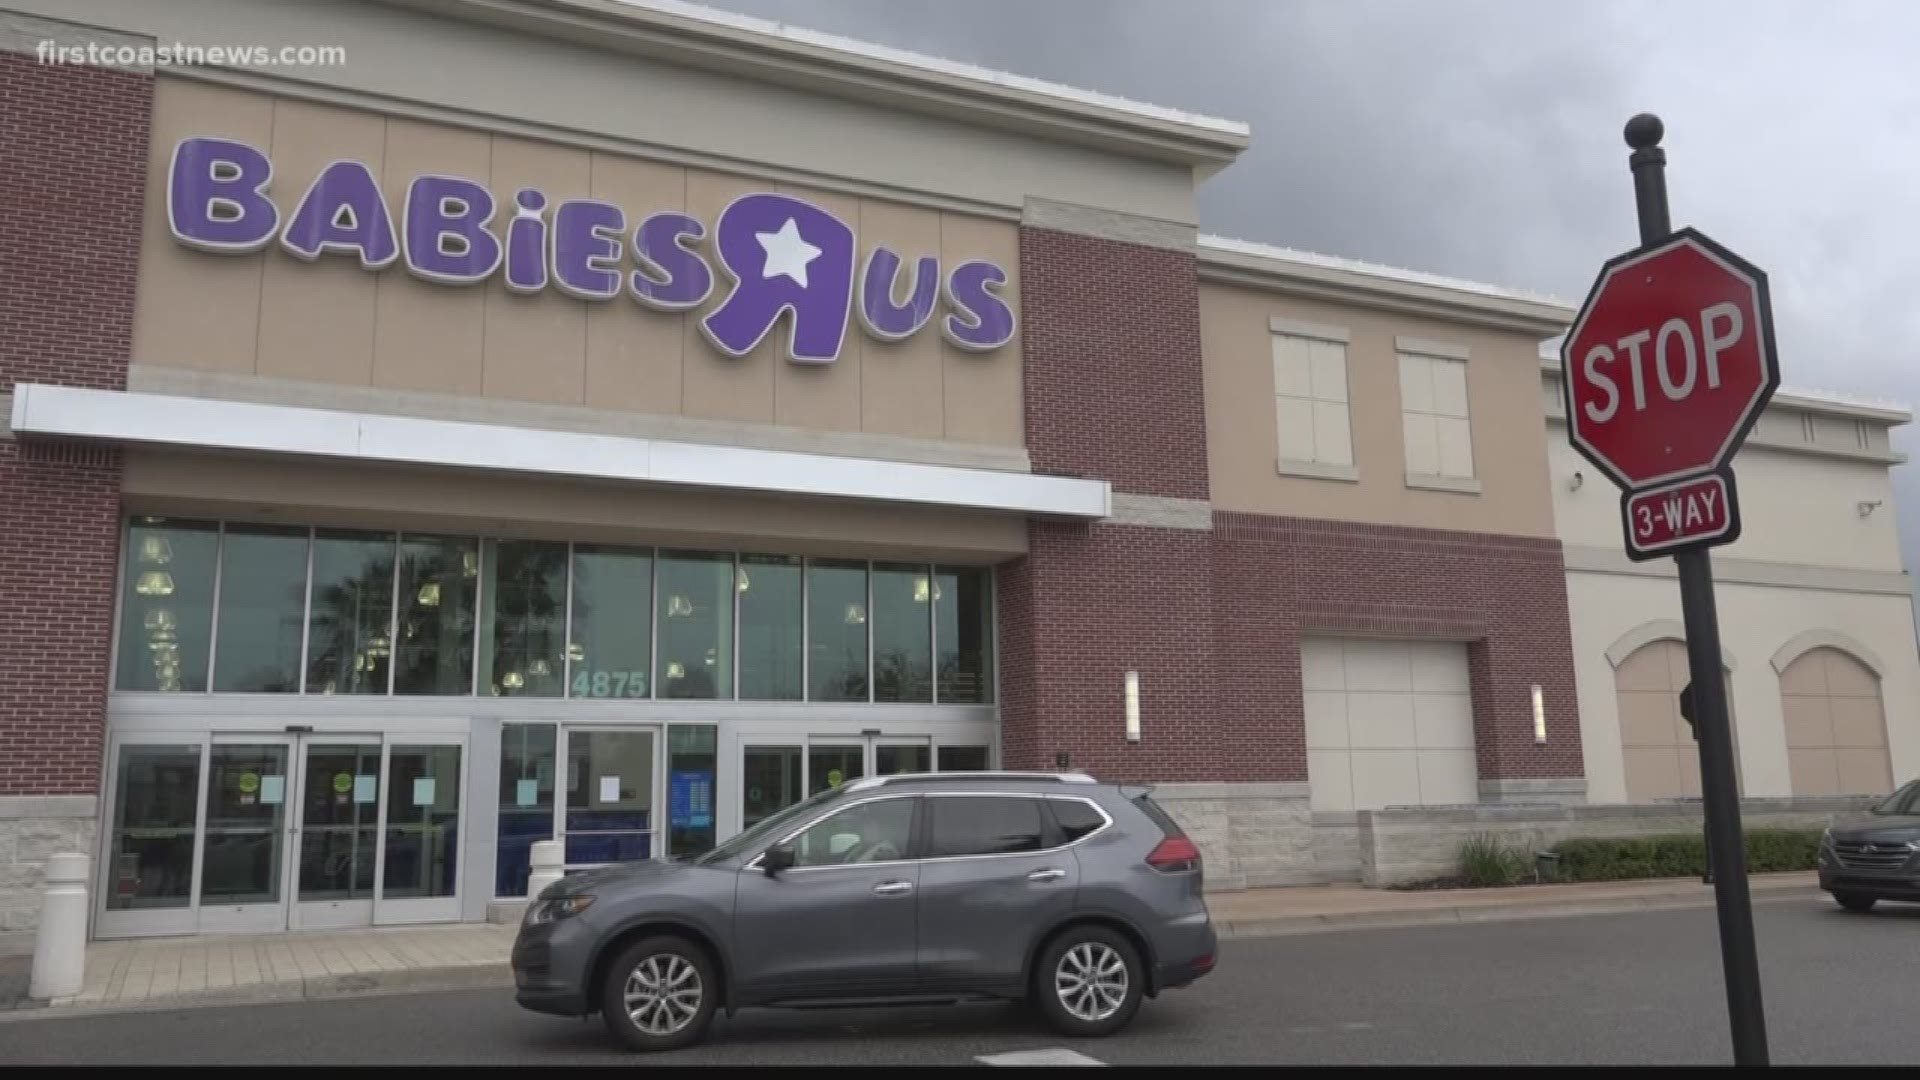 More shoppers told First Coast News they are likely to buy baby items online instead of the retailer.